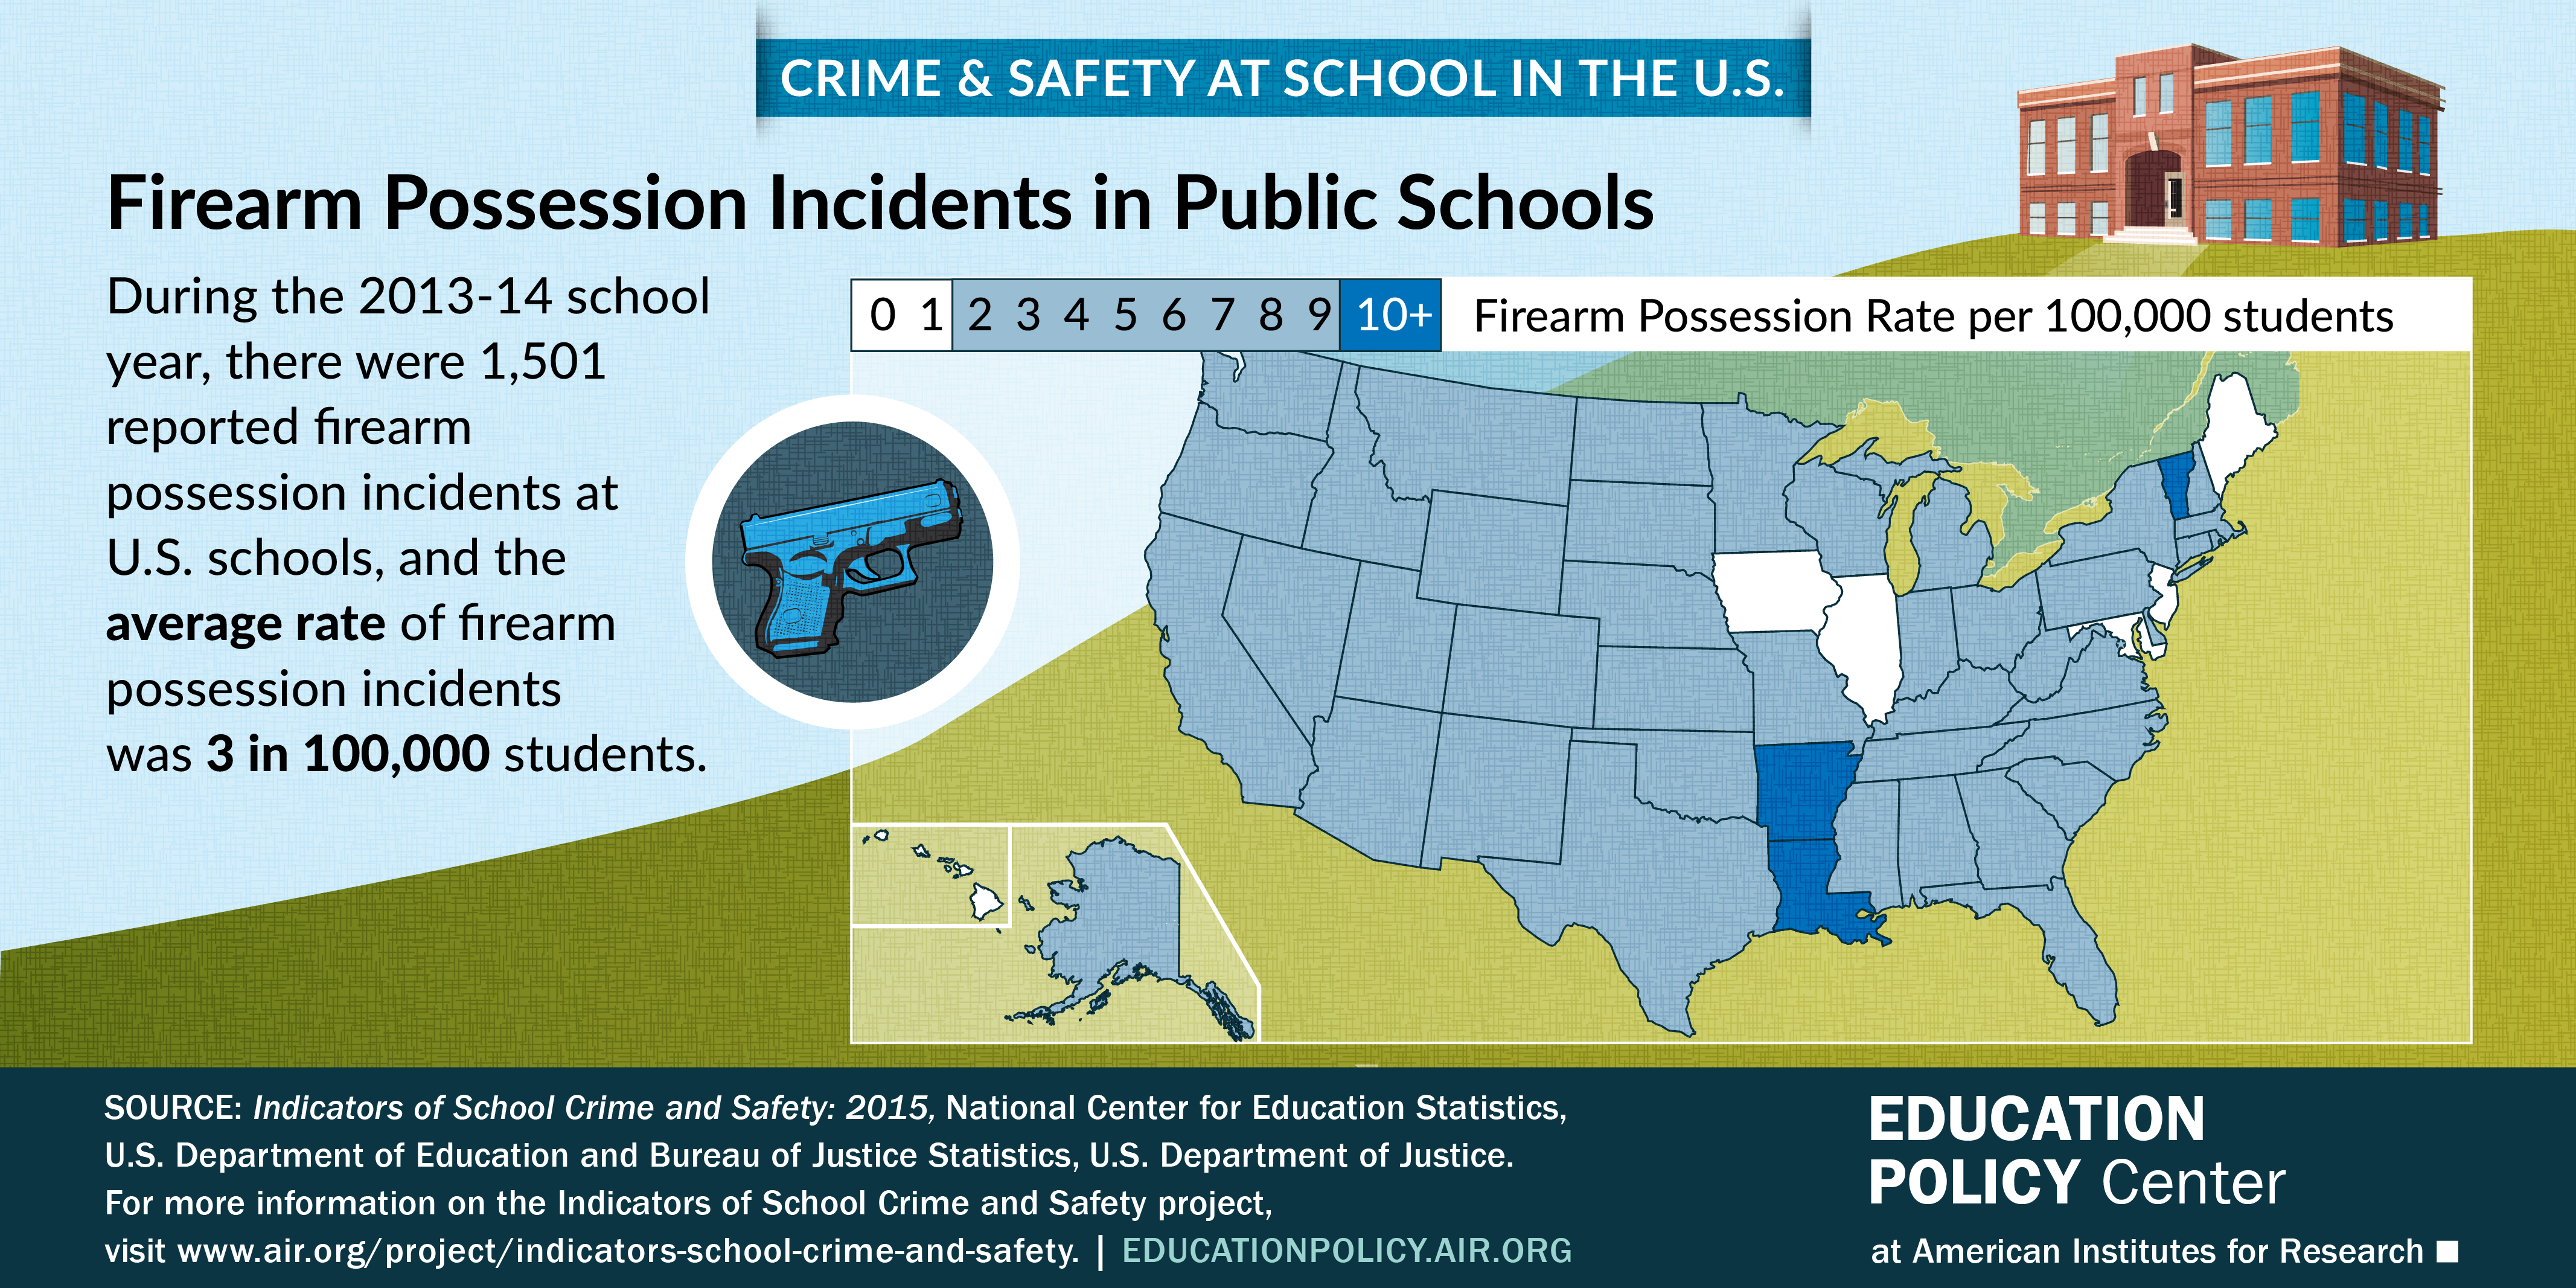 Infographic shows the firearm possession incident rate at U.S. Schools per state.